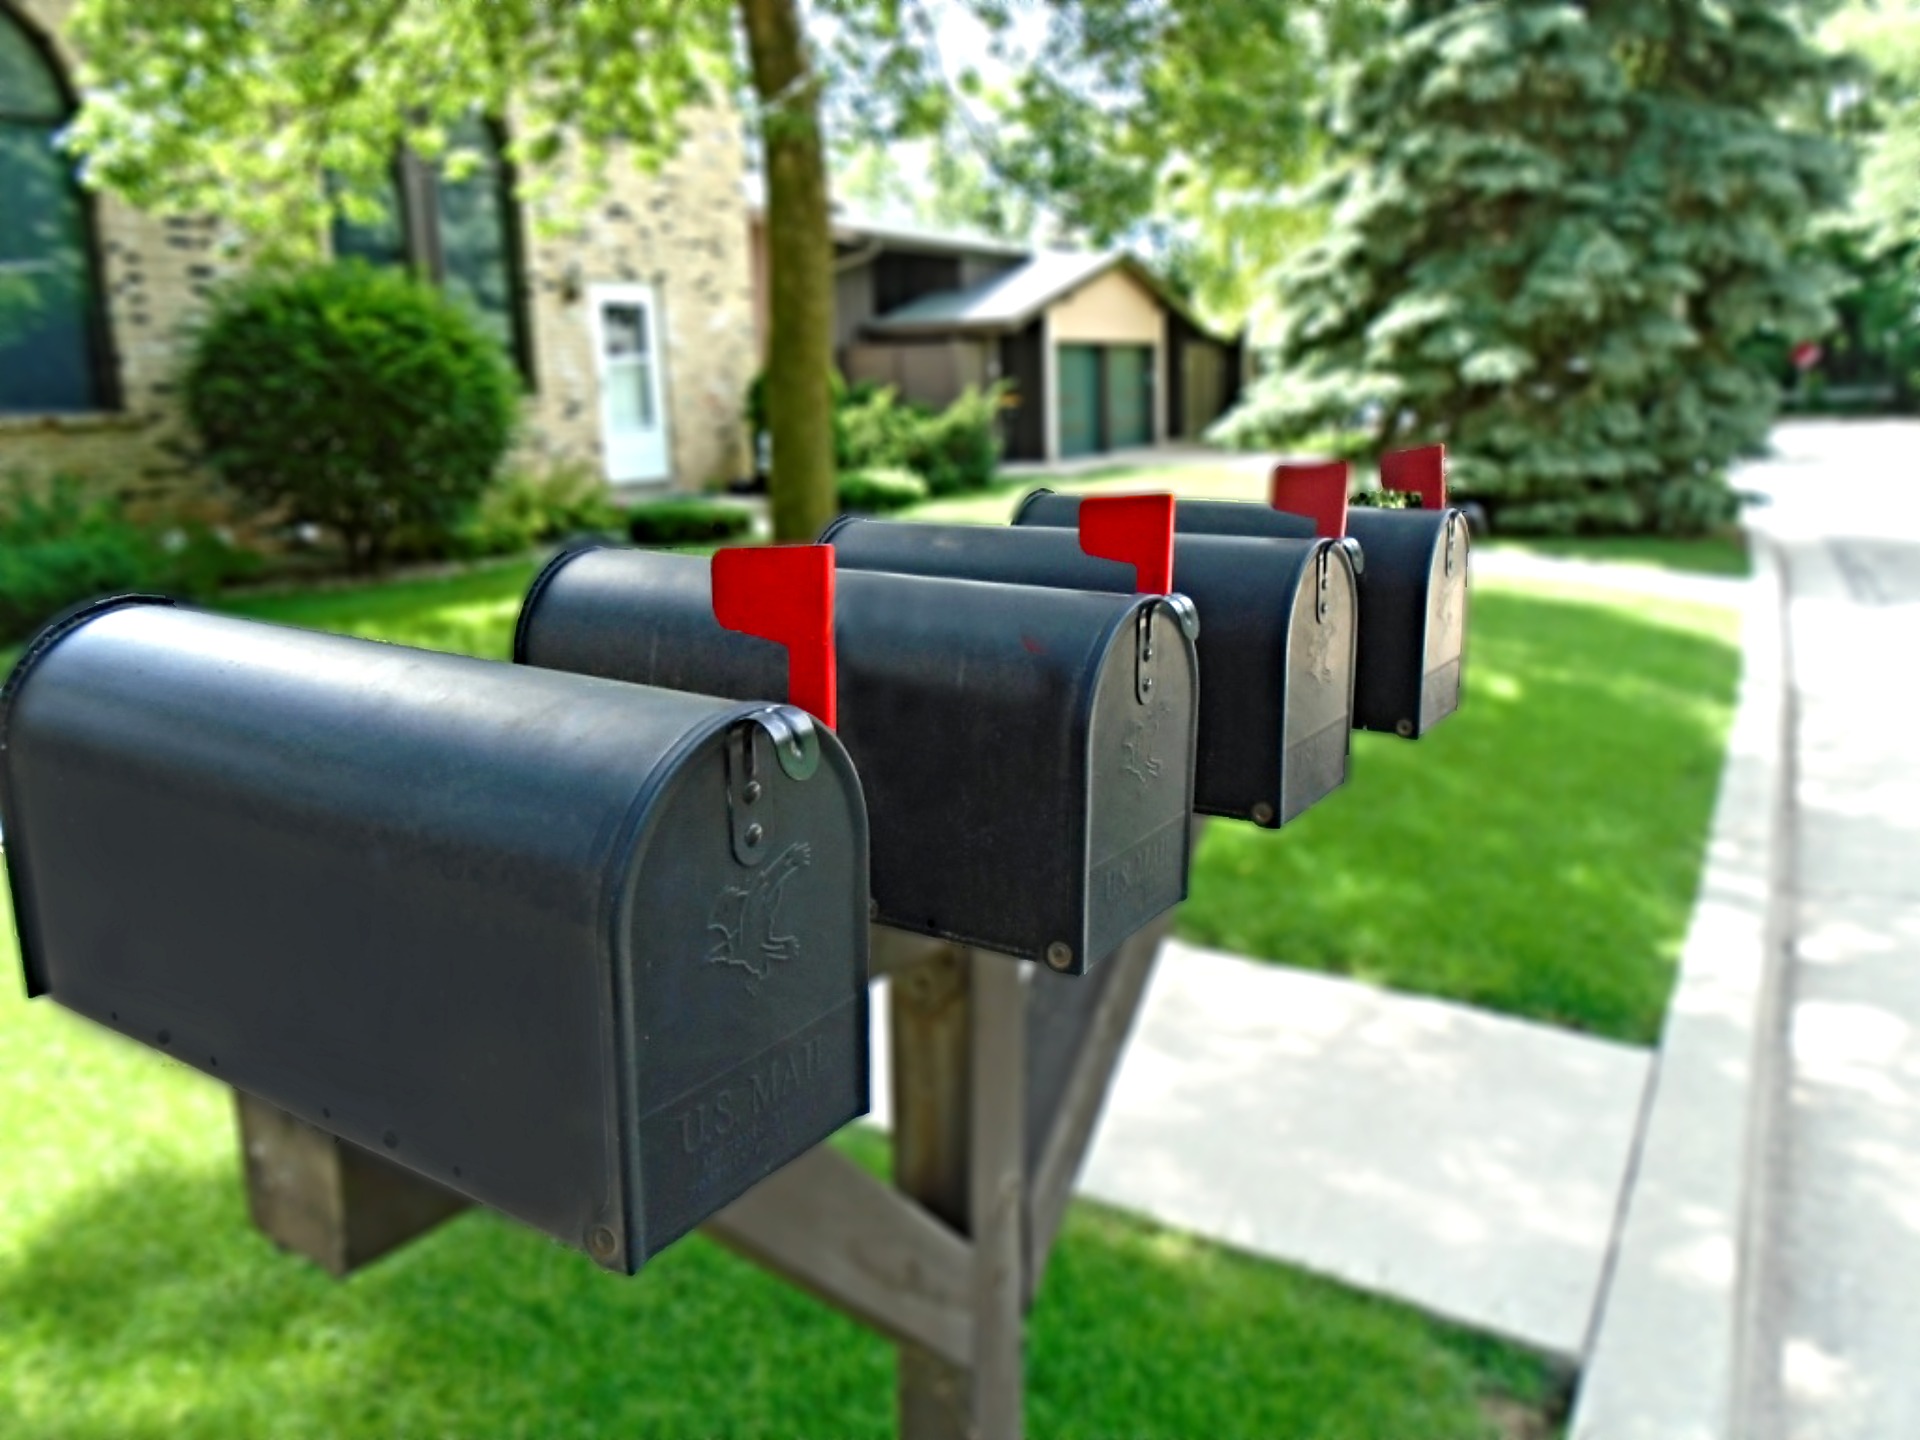 Curbside mailboxes